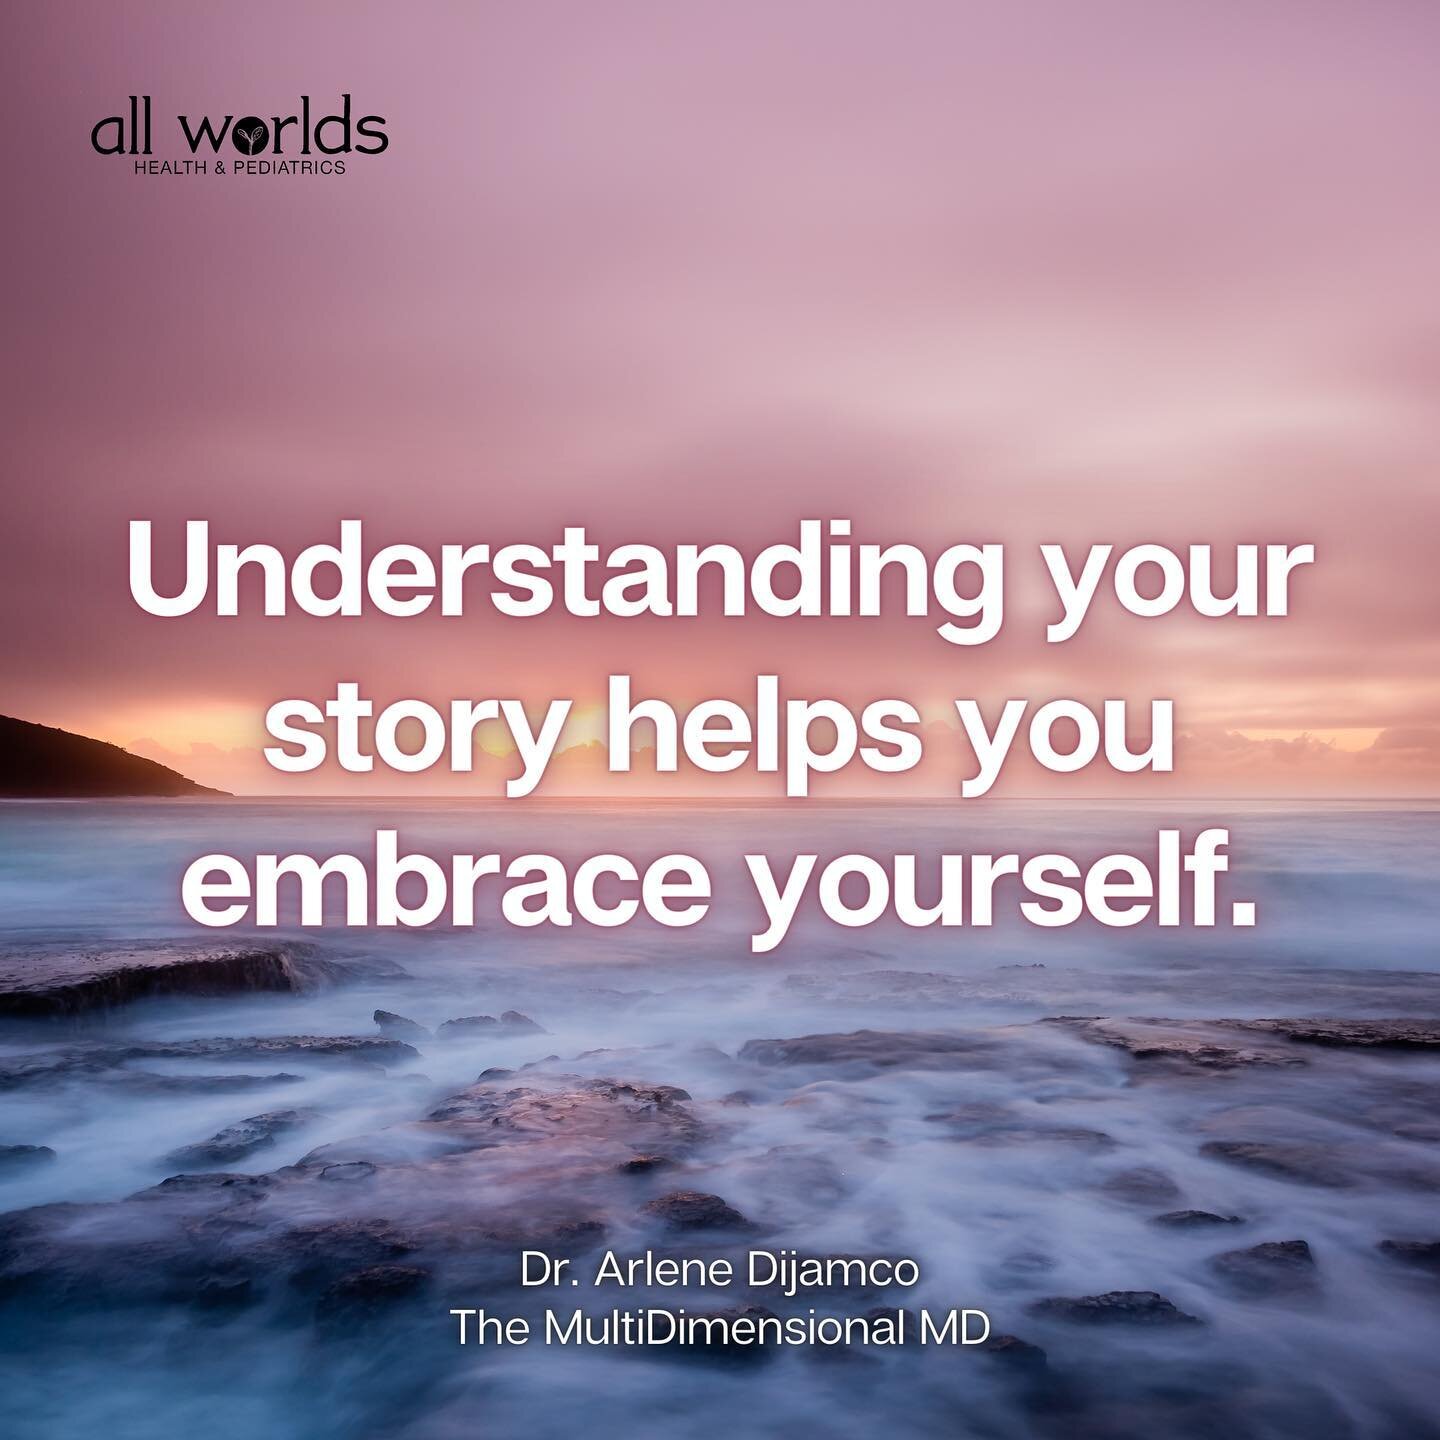 💖&nbsp;Understanding your story is so essential to healing. When you understand your own story, that helps you embrace yourself. When you understand someone else&rsquo;s story, that helps you embrace them, too. (You need both in a relationship.)

✨ 